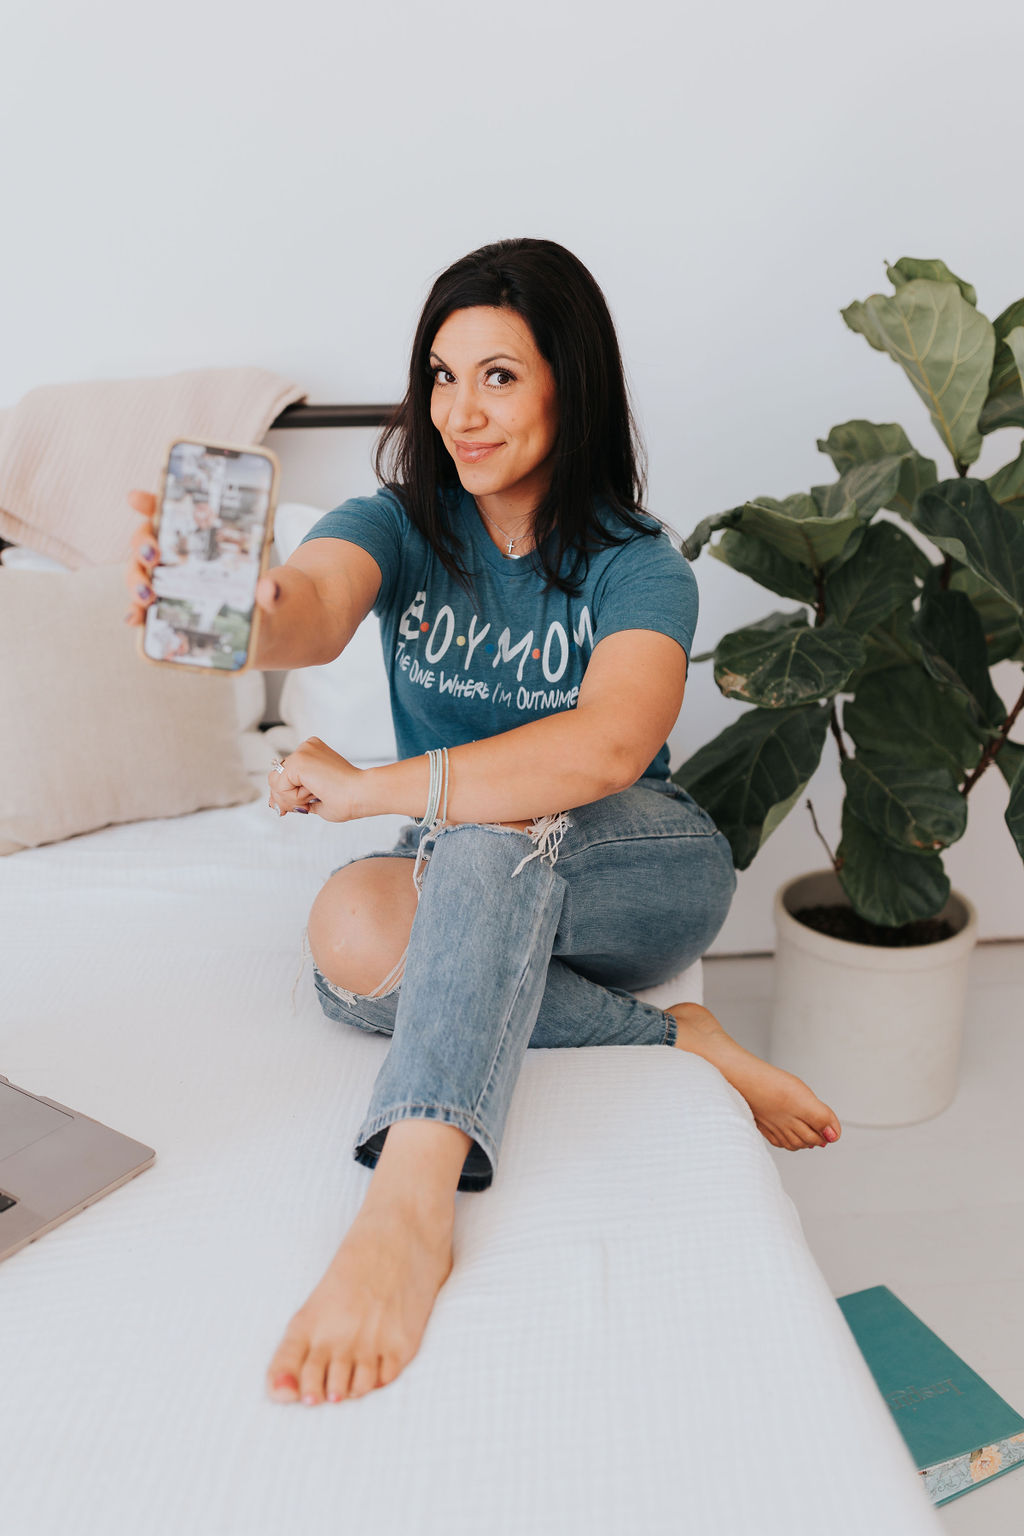 Brown haired women sitting with legs crossed, wearing jeans and teal t-shirt, holding phone out with a smile on her face, plant next to her.